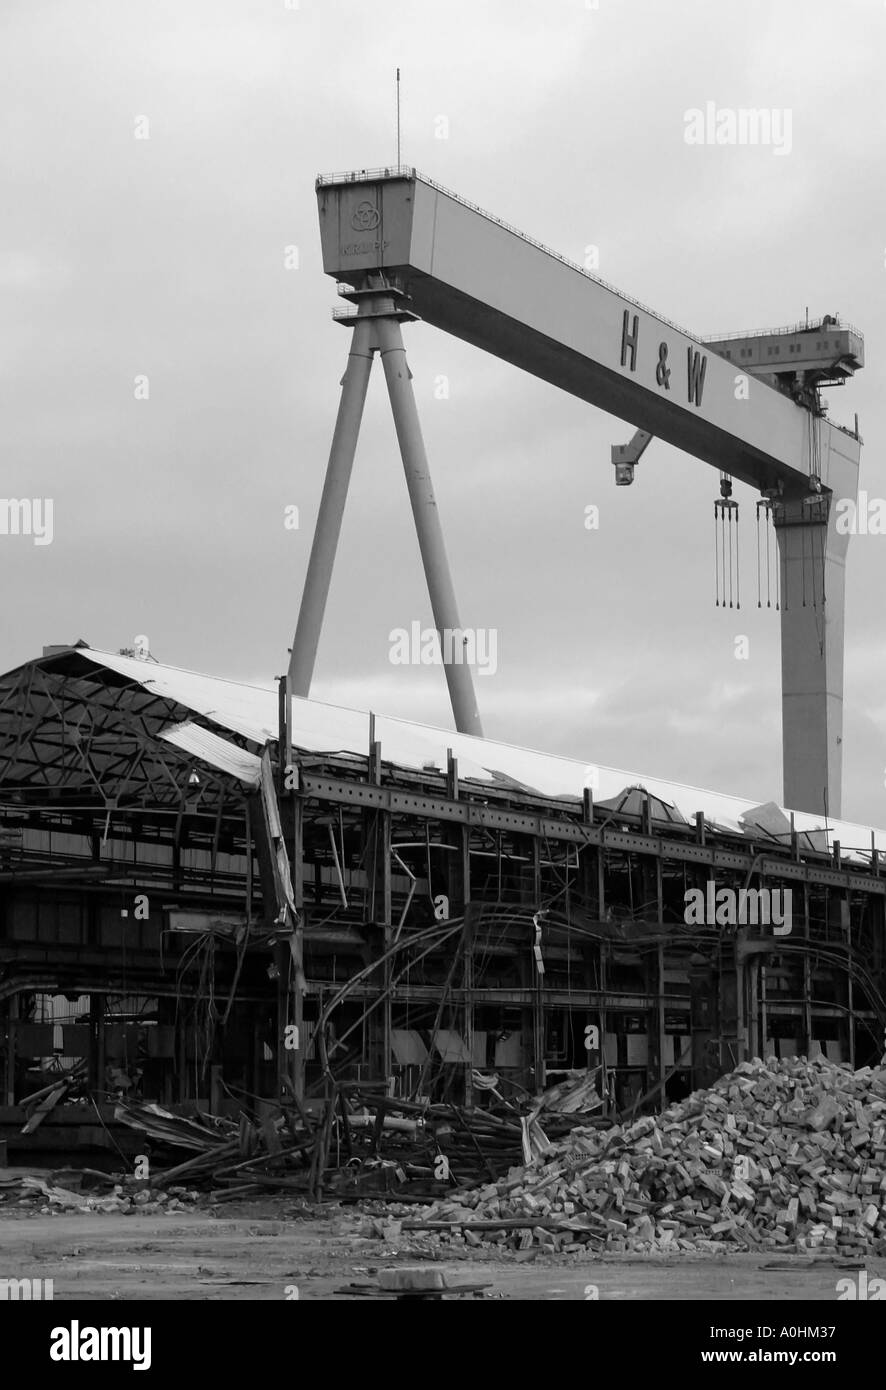 Harland and Wolff crane stands proud above the ship yard undergoing demolition Stock Photo